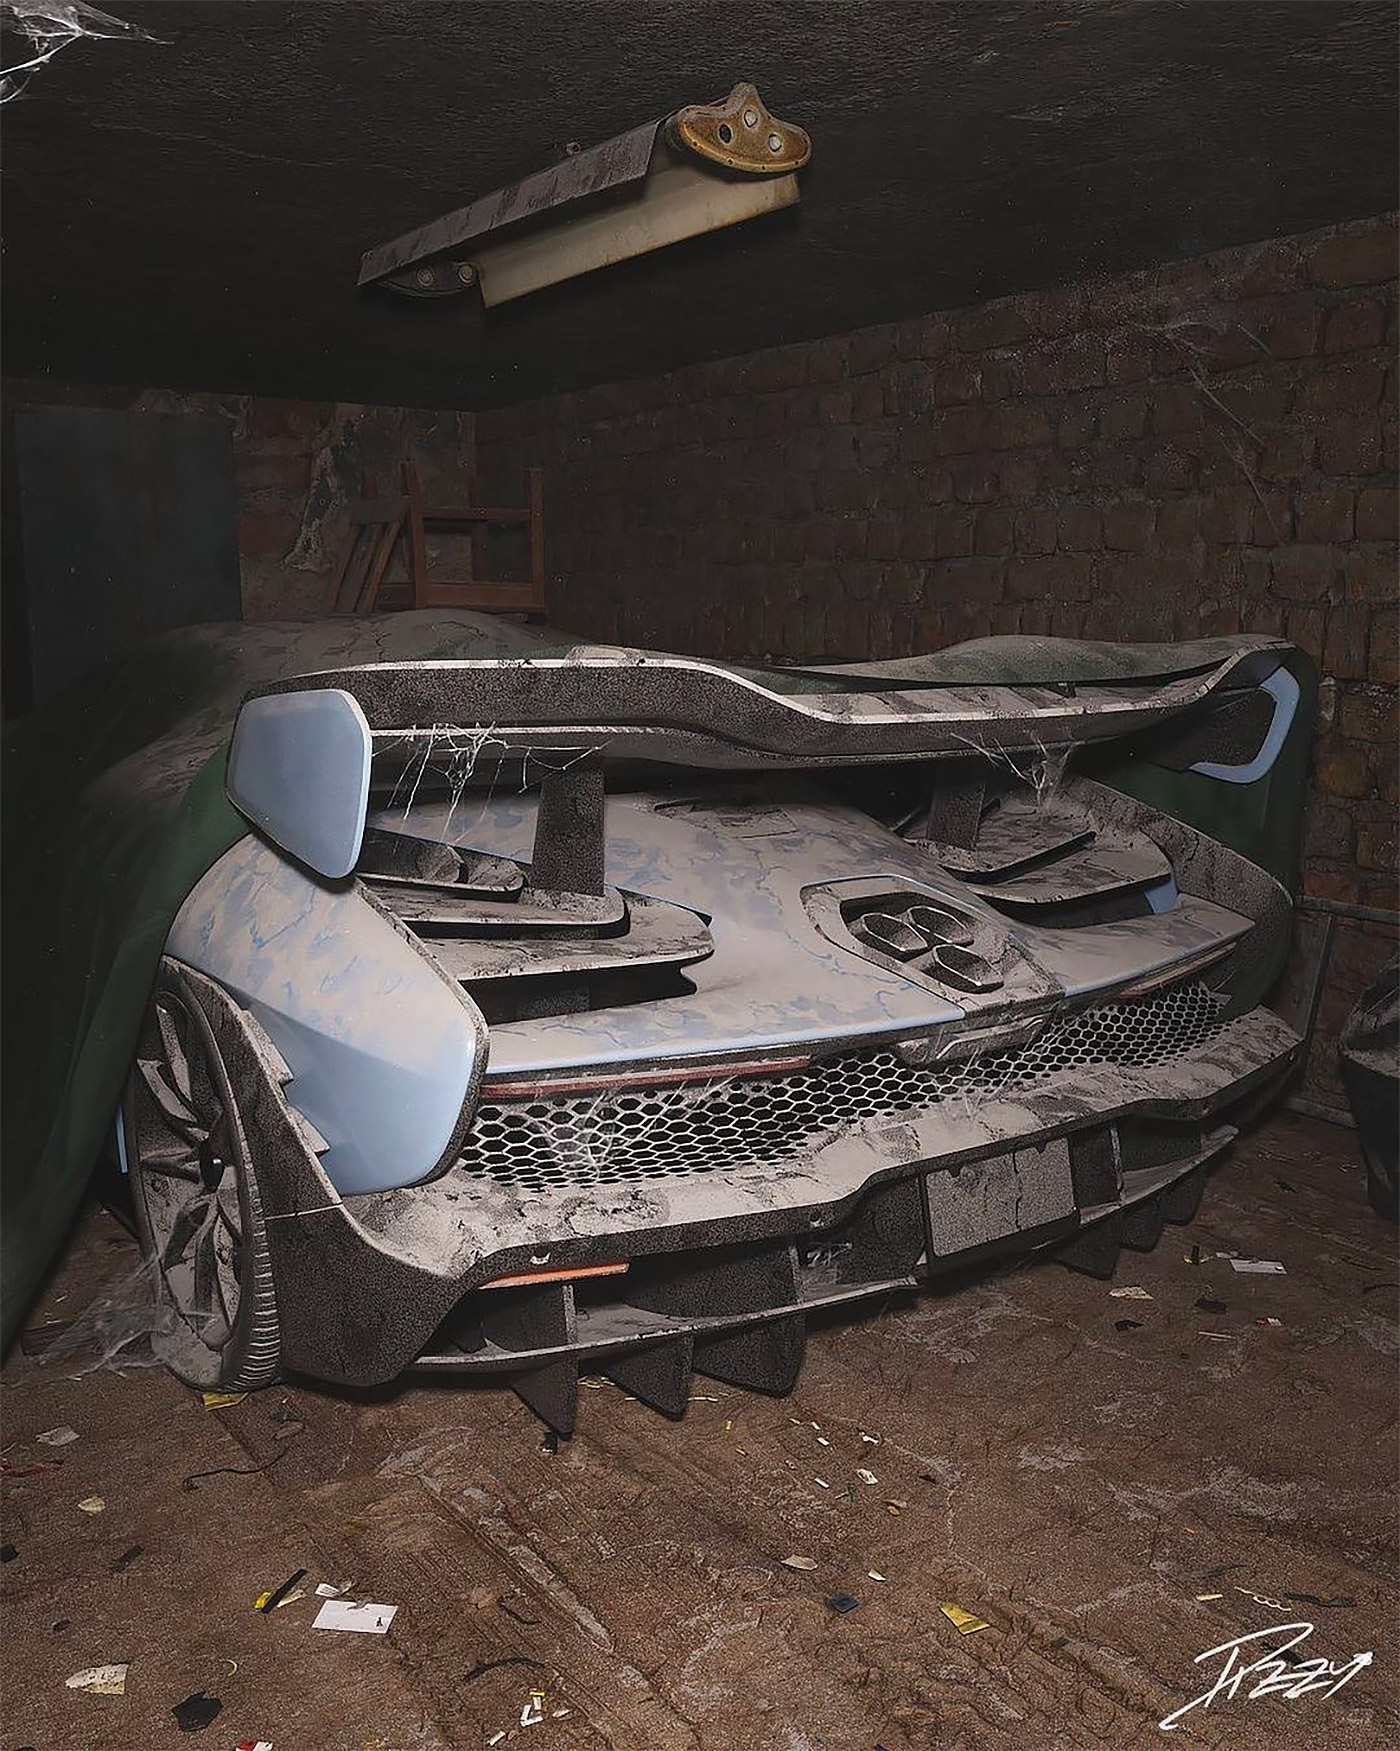 These Supercar Barn Finds Are Actually Clever, Fictional Renderings